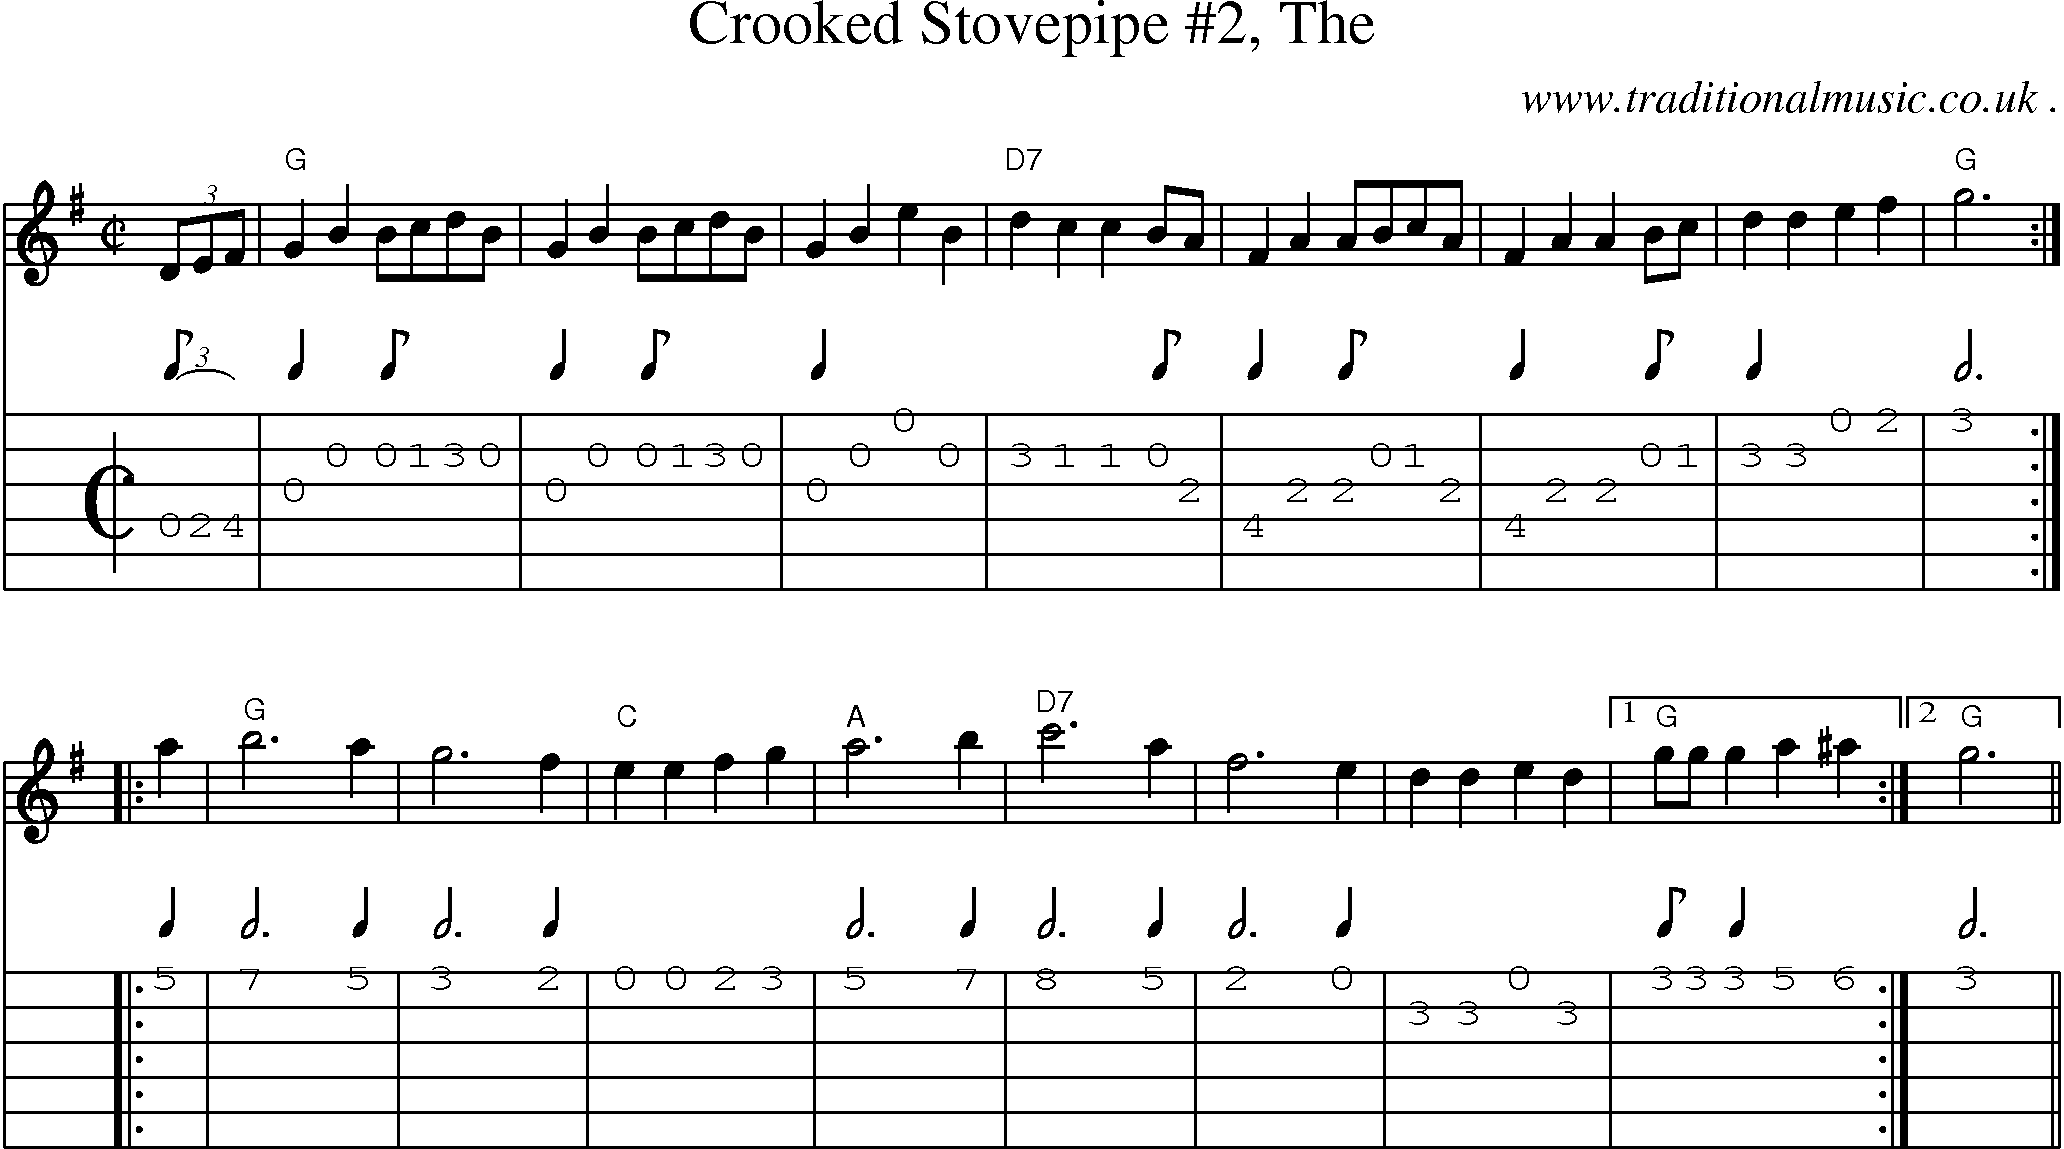 Music Score and Guitar Tabs for Crooked Stovepipe 2 The